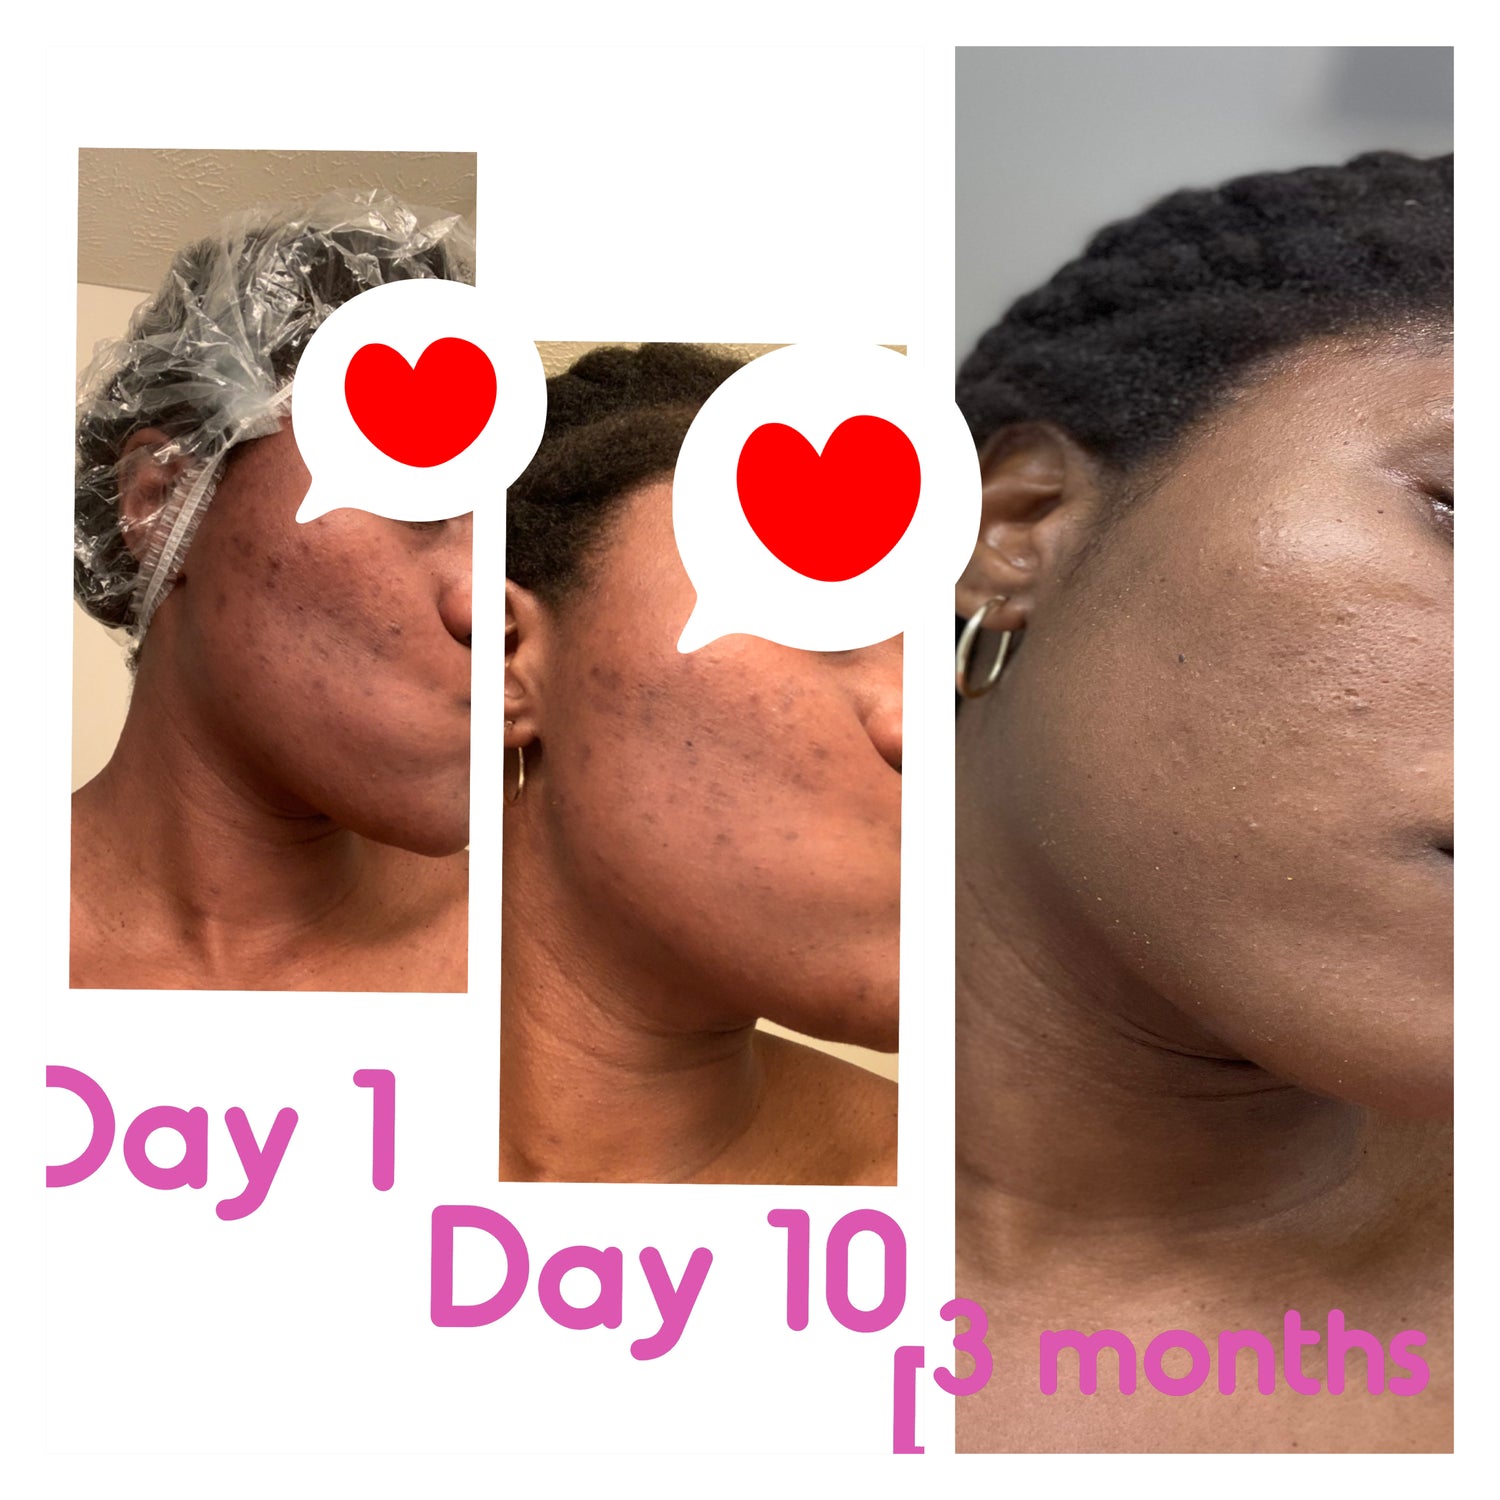 uncle benney's plant based skincare routine results for clearing hyperpigmentation and dark marks